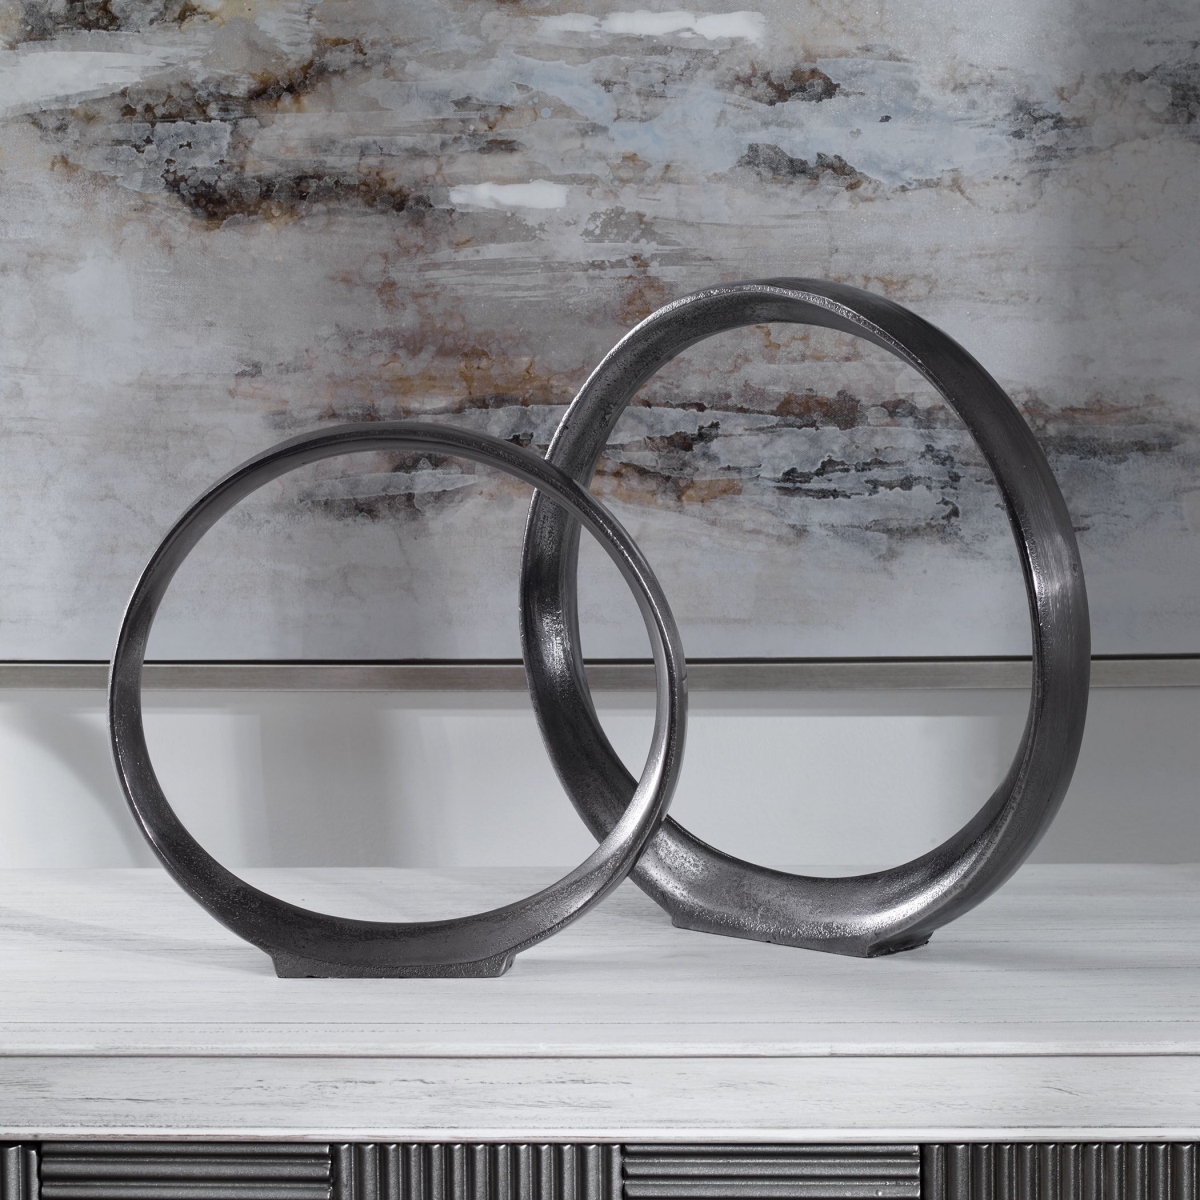 Picture of 212 Main 17913 16.4 x 7.6 x 17.2 in. Orbits Ring Sculptures  Black - Set of 2